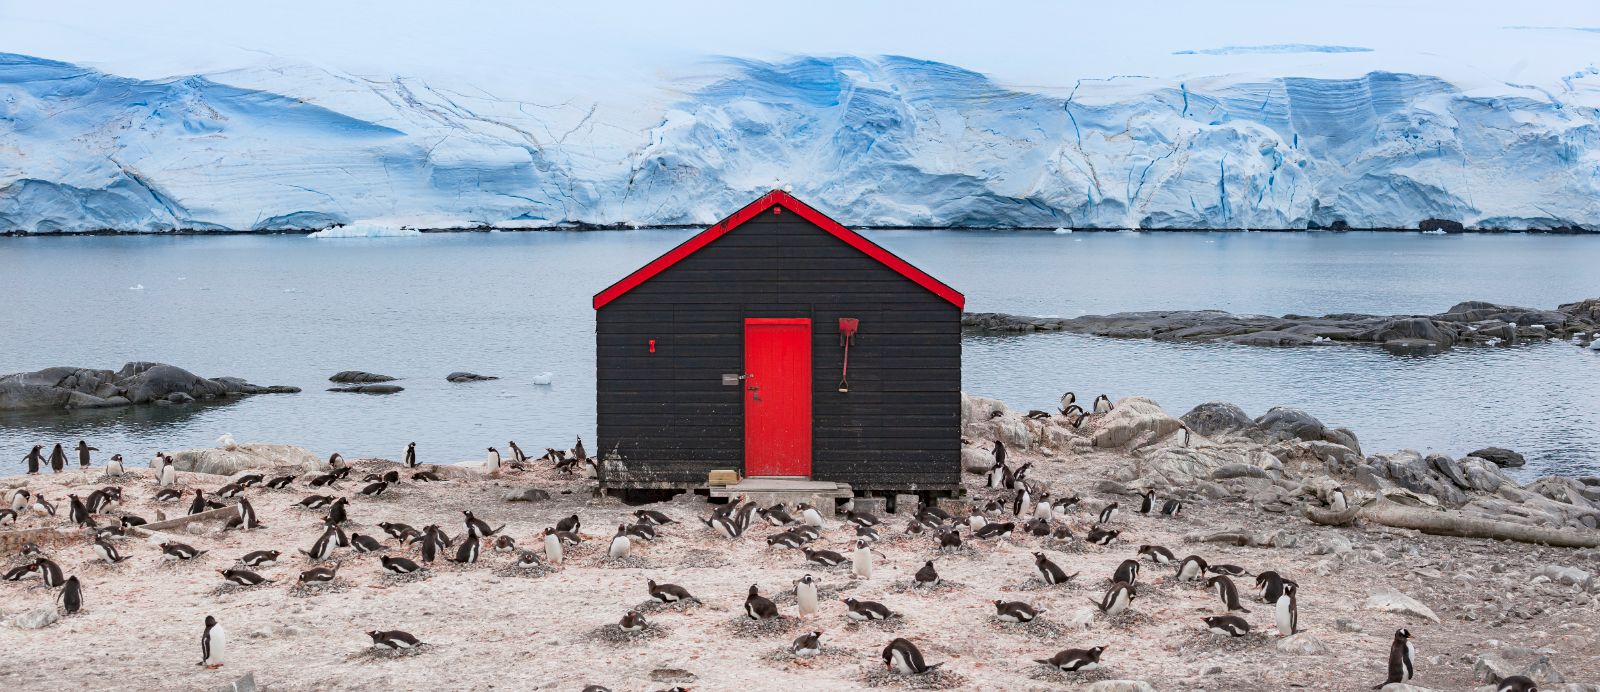 A cabin at Port Lockroy surrounded by penguins in Antarctica